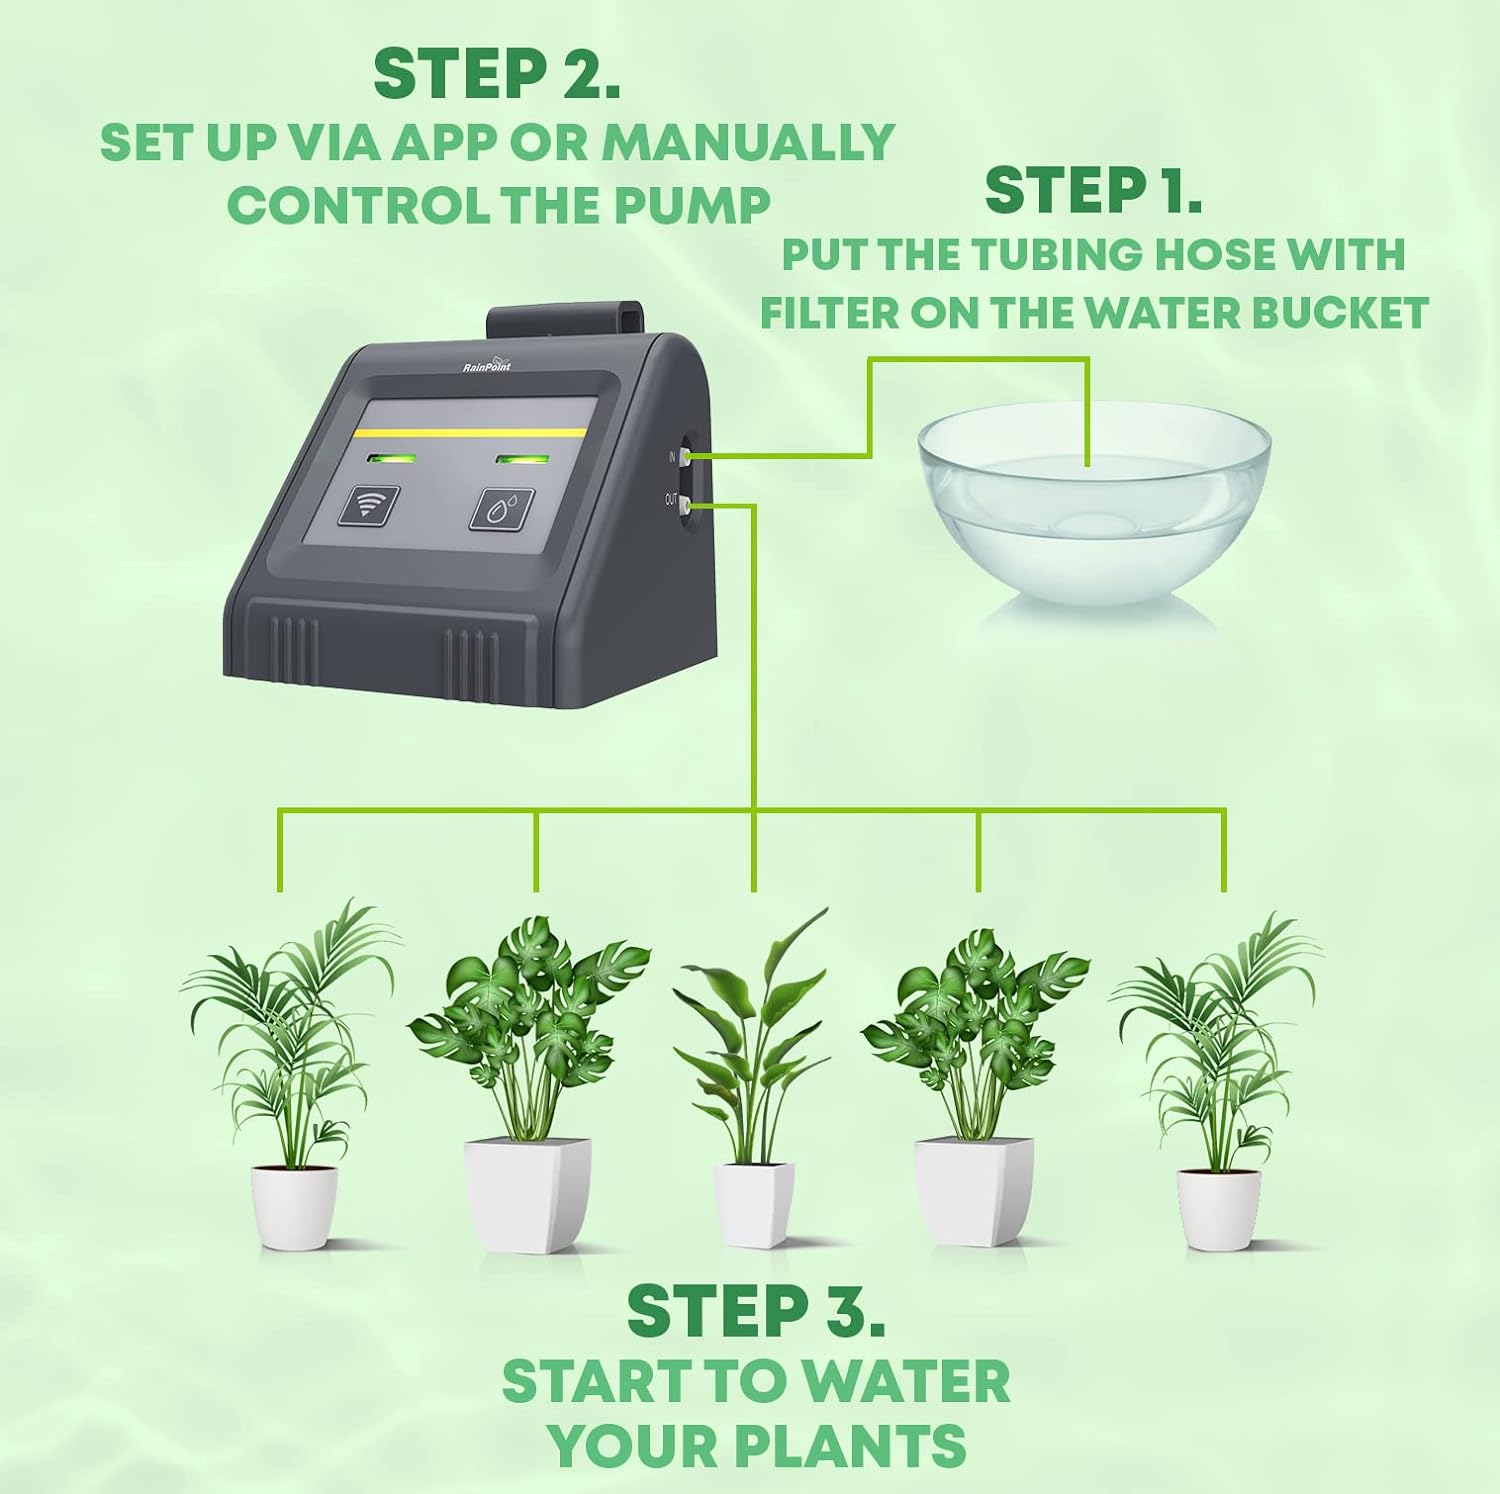 BALDR Electronic- Wi-Fi App-Controlled Indoor Irrigation Kit, Automatic Watering System for Indoor Plants with DIY Drip Irrigation, Pump and Smart Scheduling for House Plants